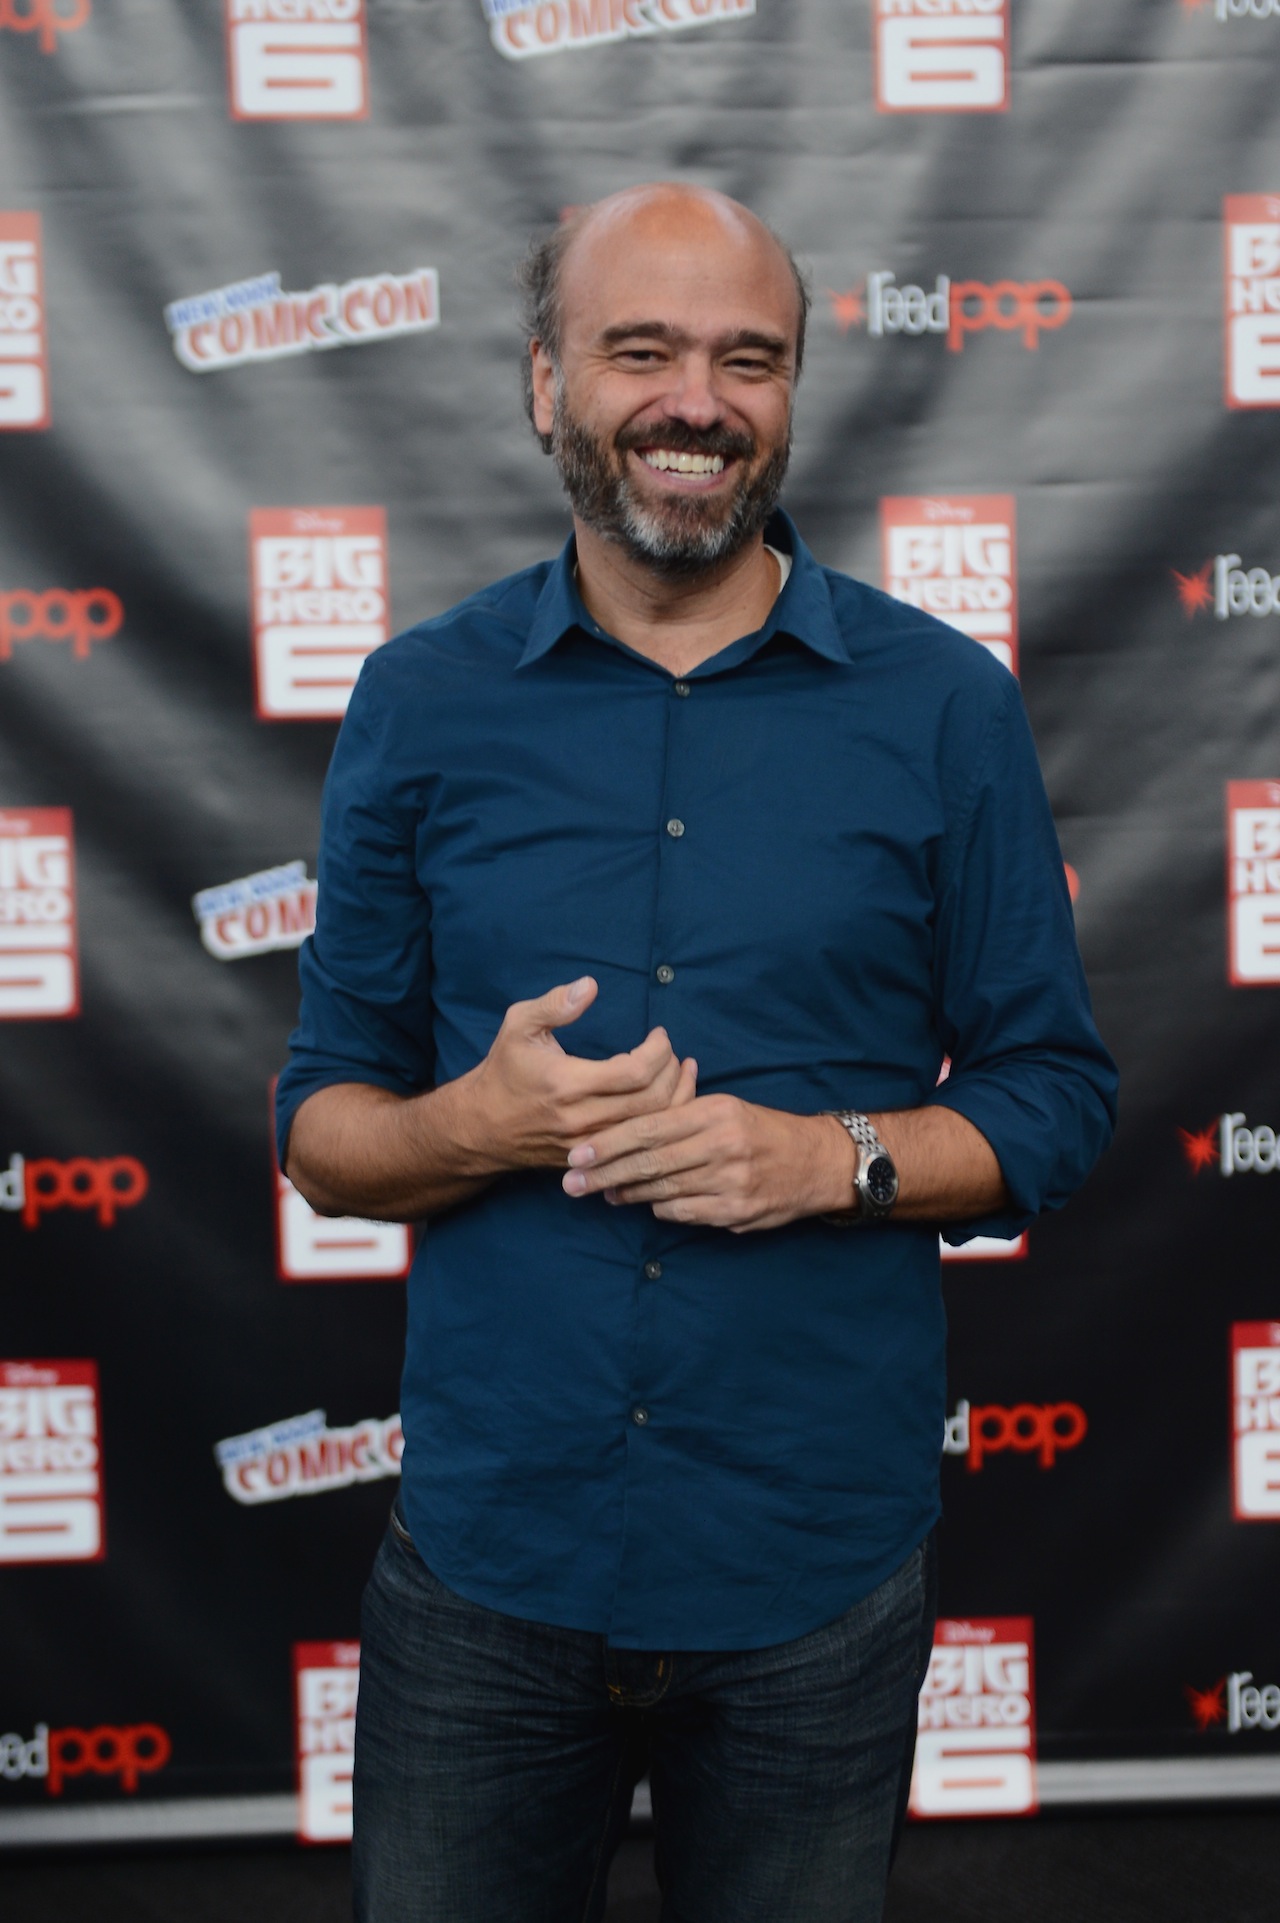 NEW YORK, NY - OCTOBER 09:  Actor Scott Adsit attends Walt Disney Studios' 2014 New York Comic Con presentations of "Big Hero 6" and "Tomorrowland" at the Javits Convention Center on Thursday October 9, 2014 in New York City.  (Photo by Stephen Lovekin/Getty Images for Disney) *** Local Caption *** Scott Adsit